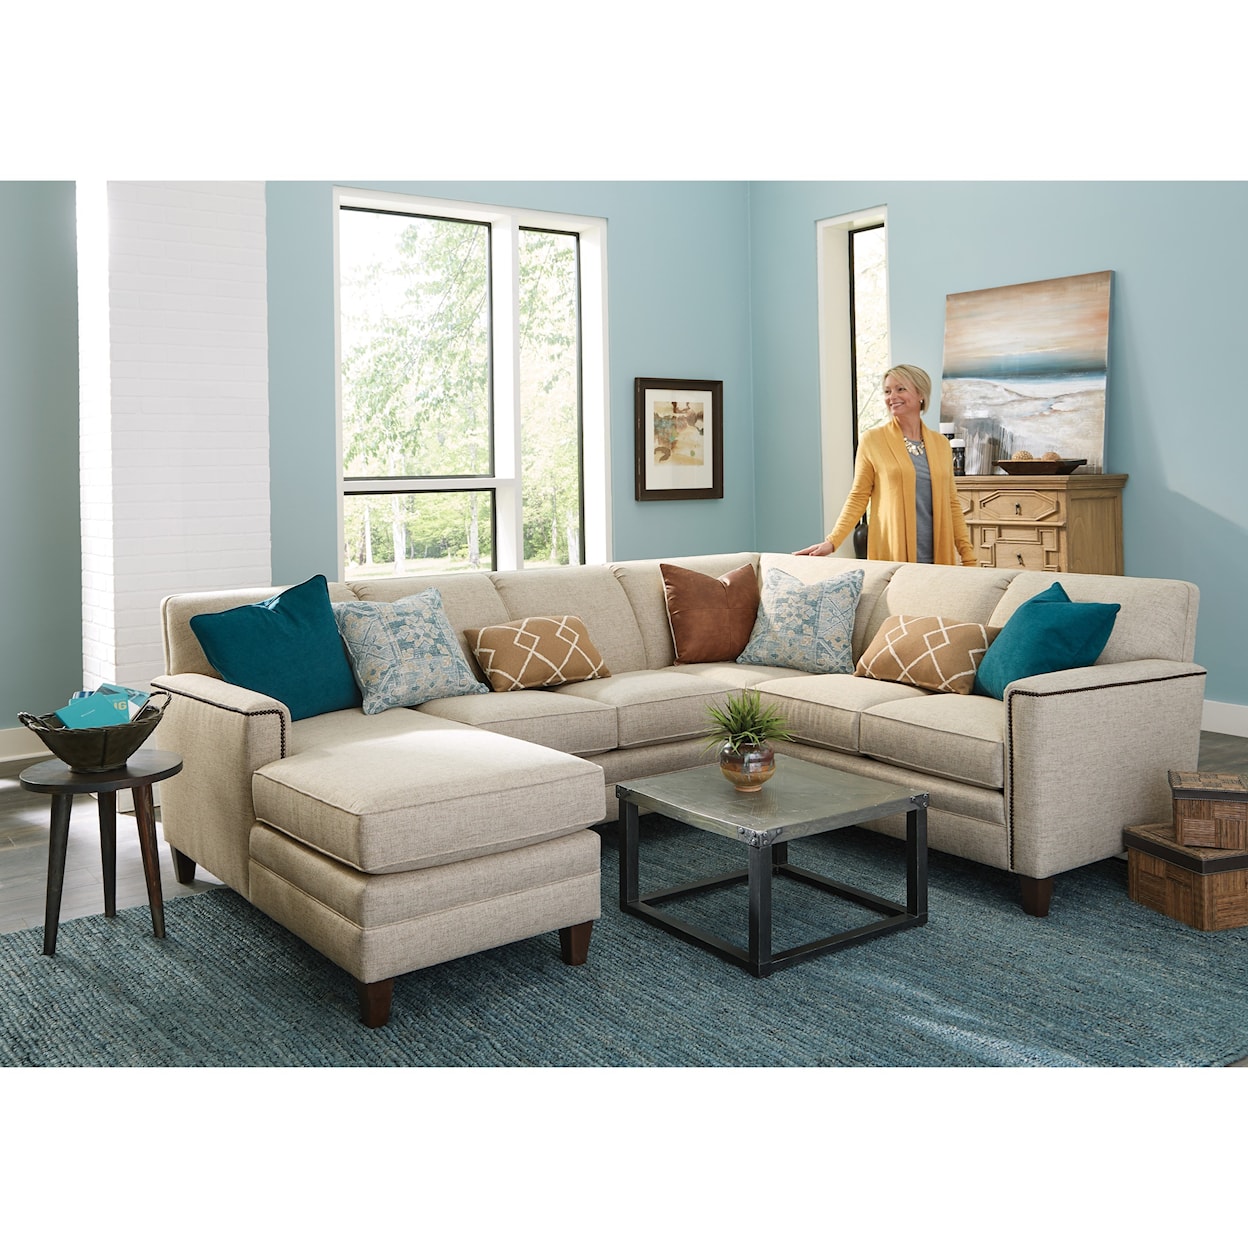 Kirkwood Build Your Own 3000 Series Customizable 3-Piece Chaise Sectional